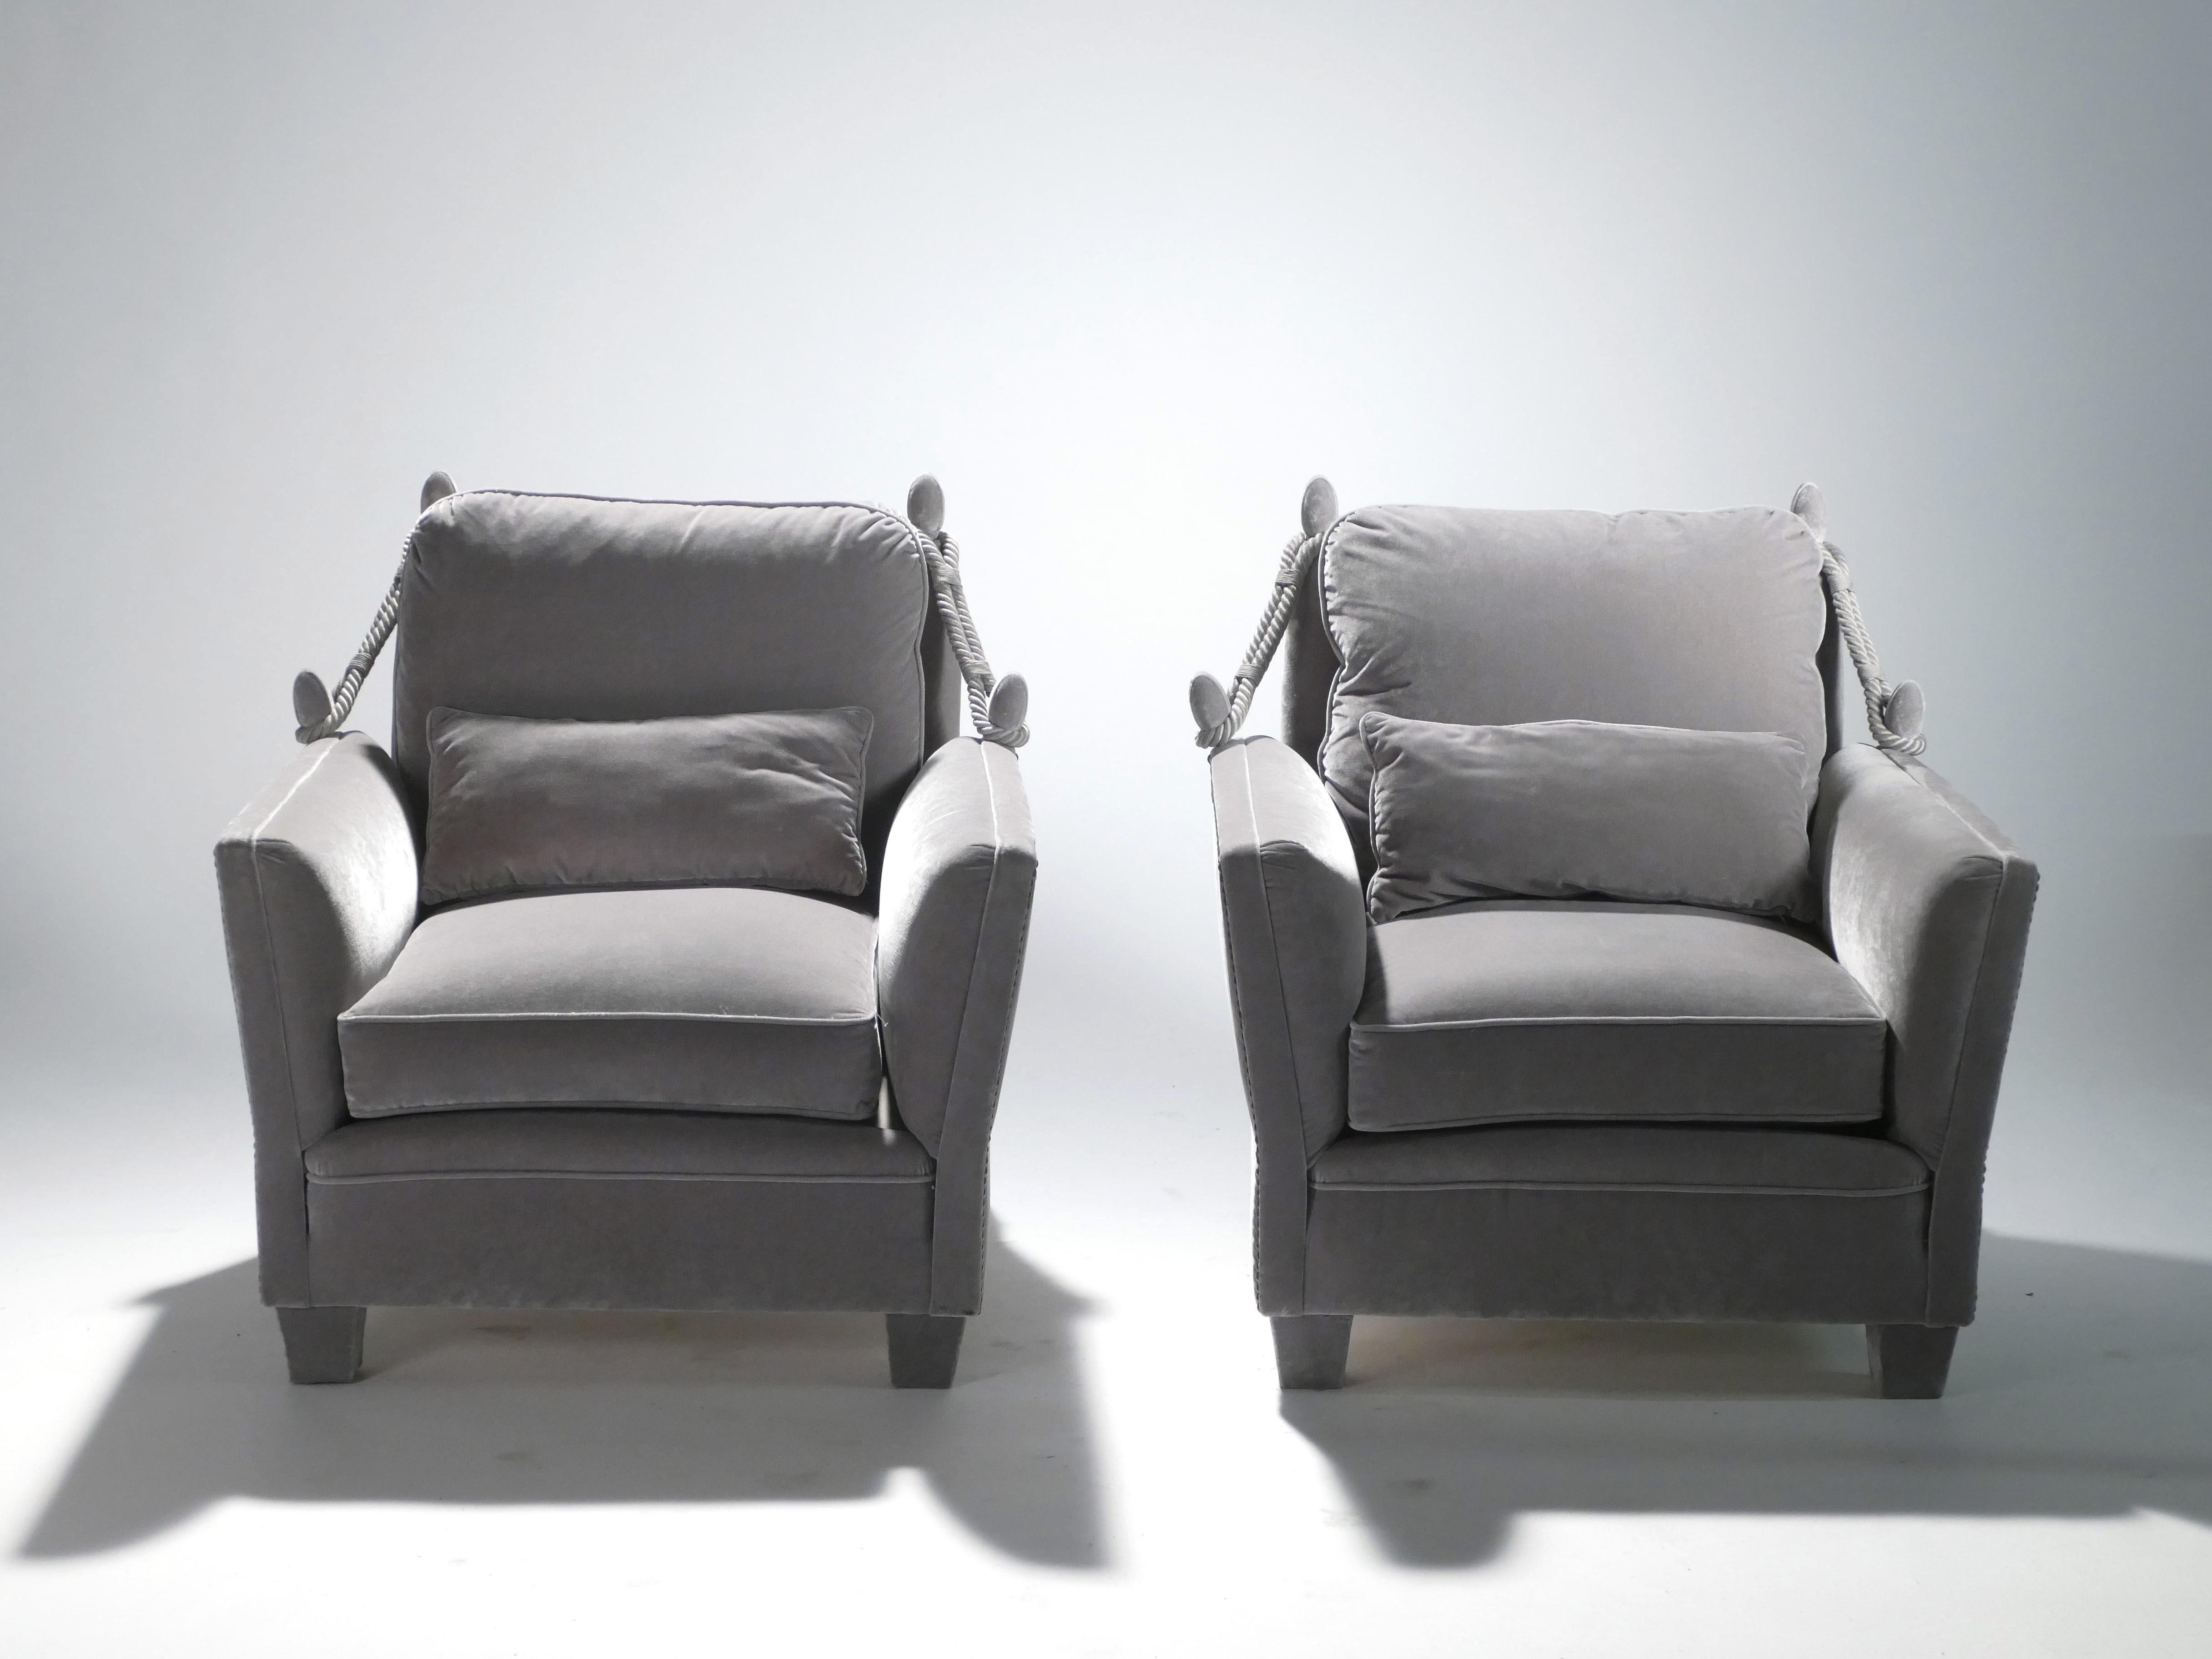 These chic, monochromatic armchairs feature their original, beautiful neoclassical structure, newly reupholstered in soft grey velvet Nobilis Quai de Seine. Passementerie details at either side give the pair an unmistakably French vintage appeal.